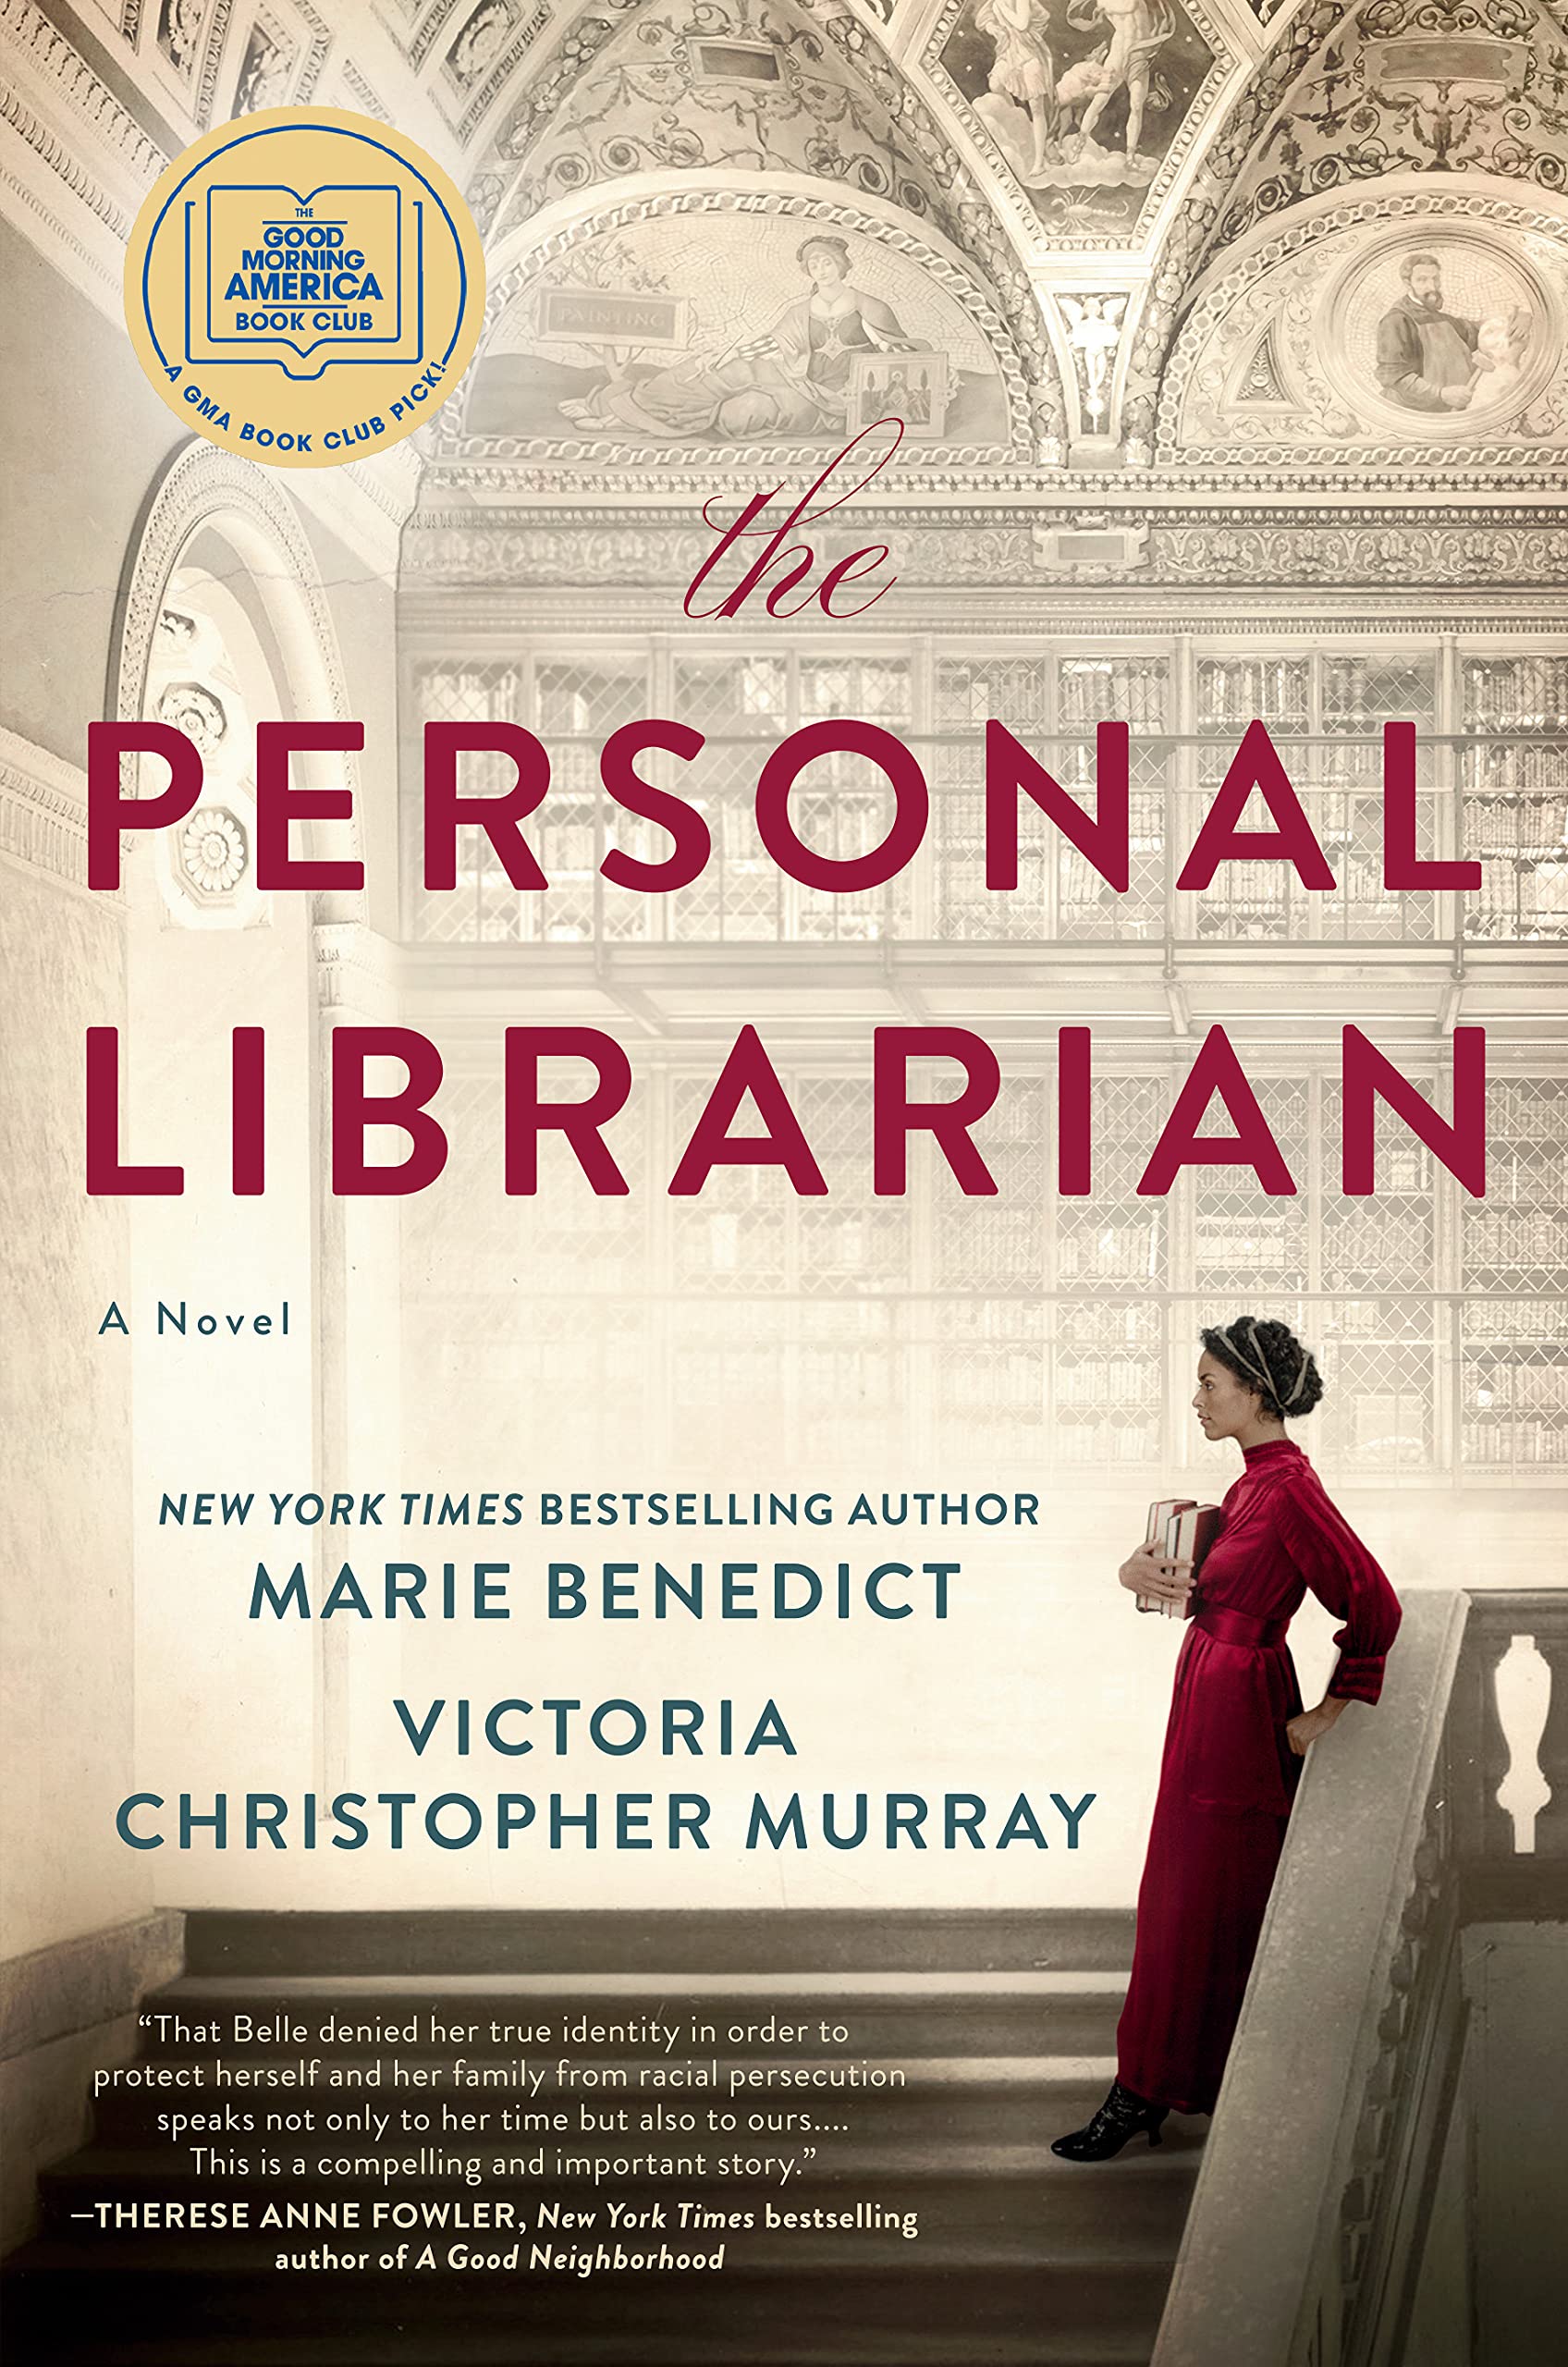 Cover of The Personal Librarian by Heather Terrell and Victoria Christopher Murray